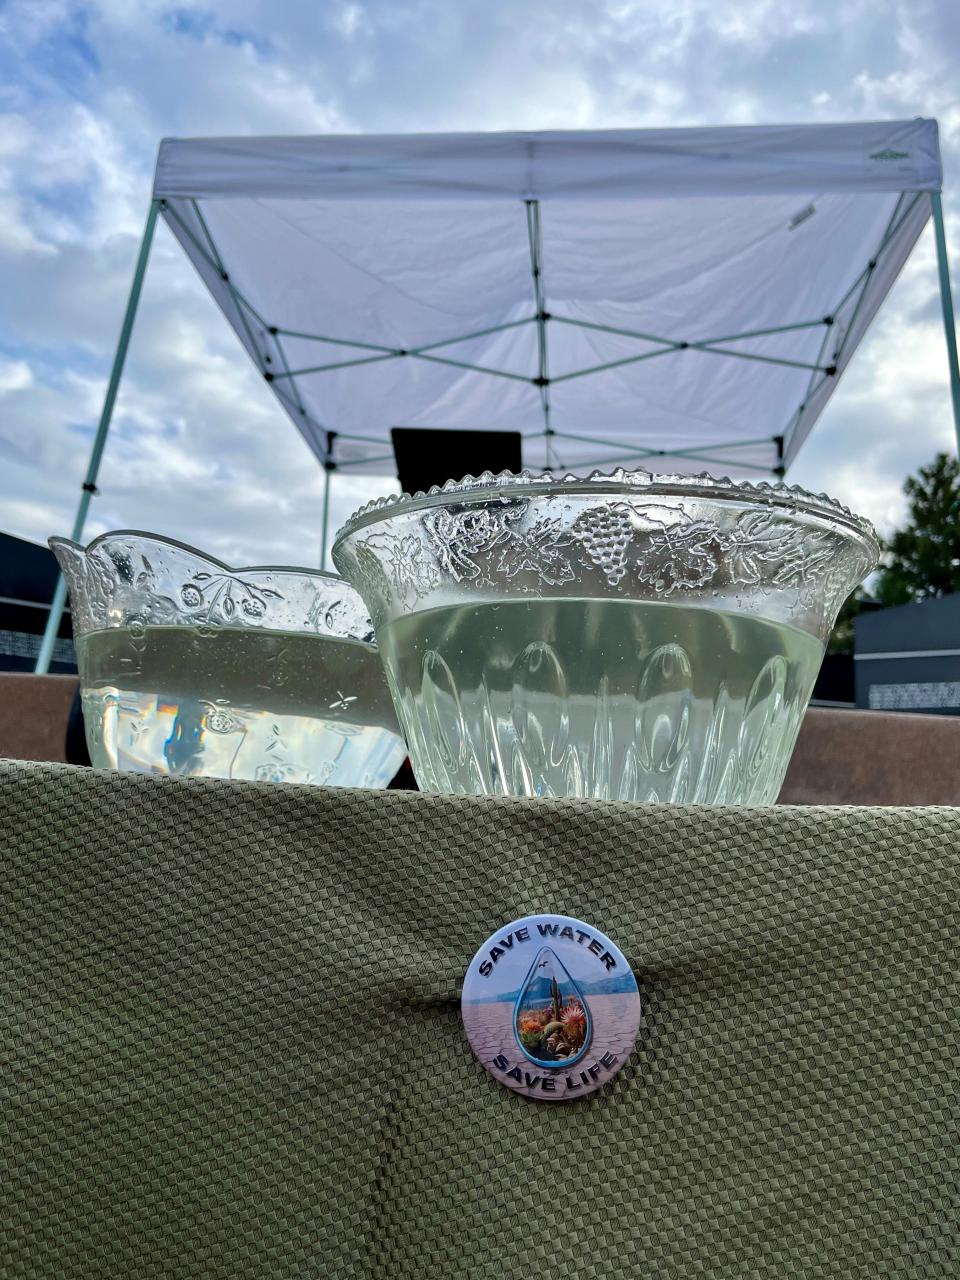 Glass bowls set out on a table in Wesley Bolin Memorial Plaza allowed attendees of the Environment Day at the Arizona Capitol event on January 25, 2024 to pour water brought from different sources into them in recognition of the importance of this natural resource.